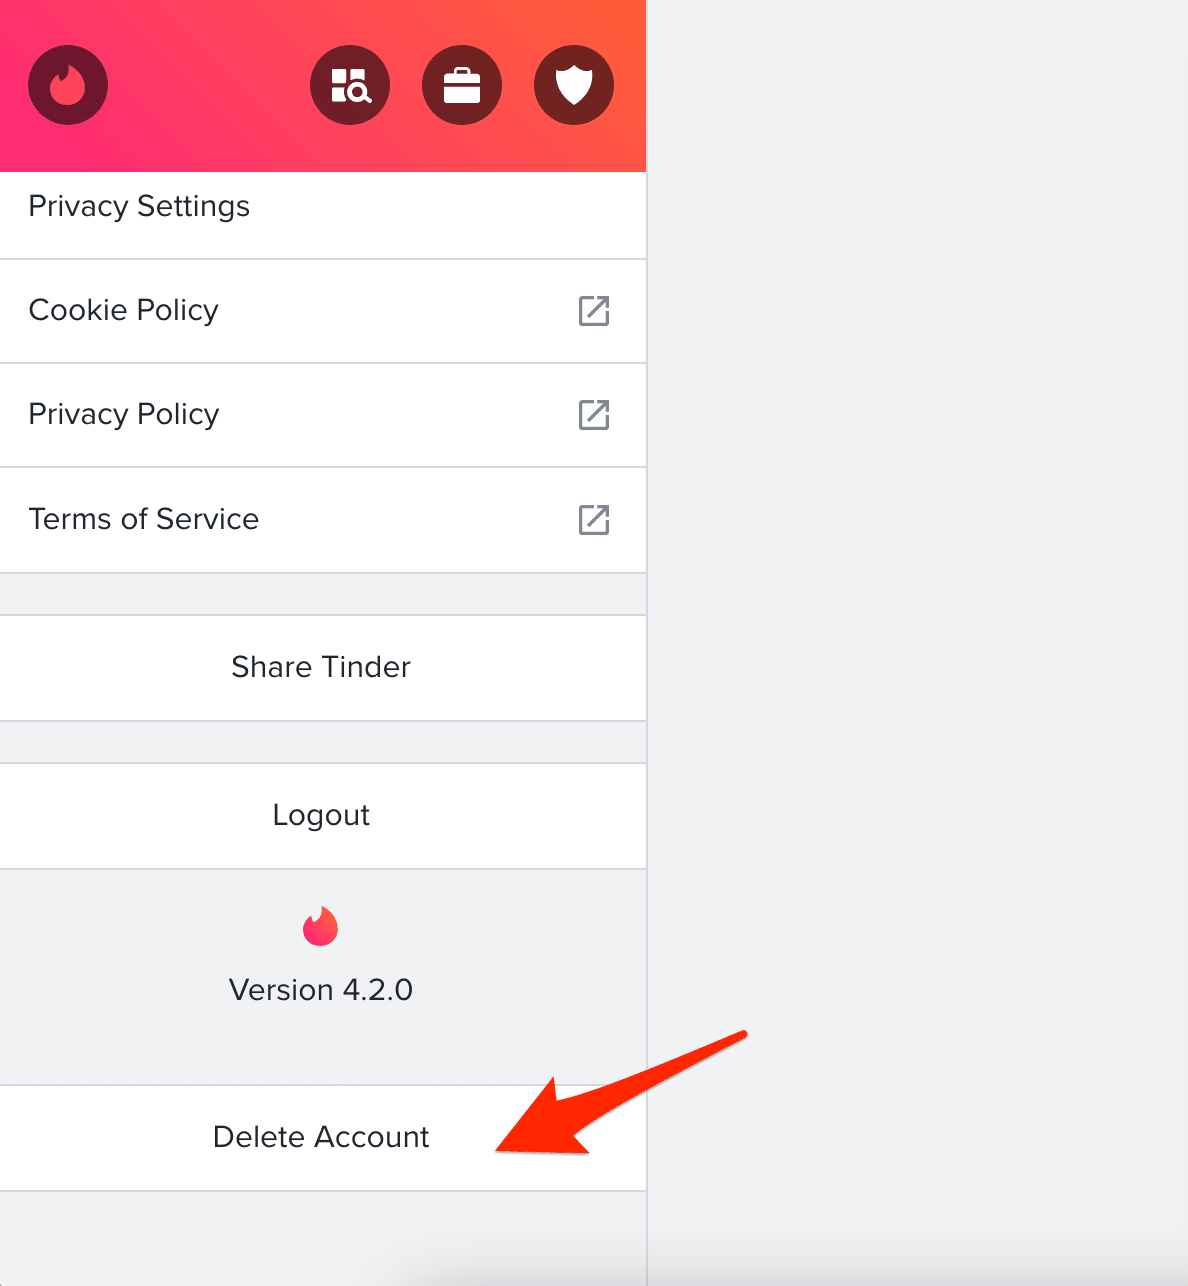 Select the "Delete Account" option